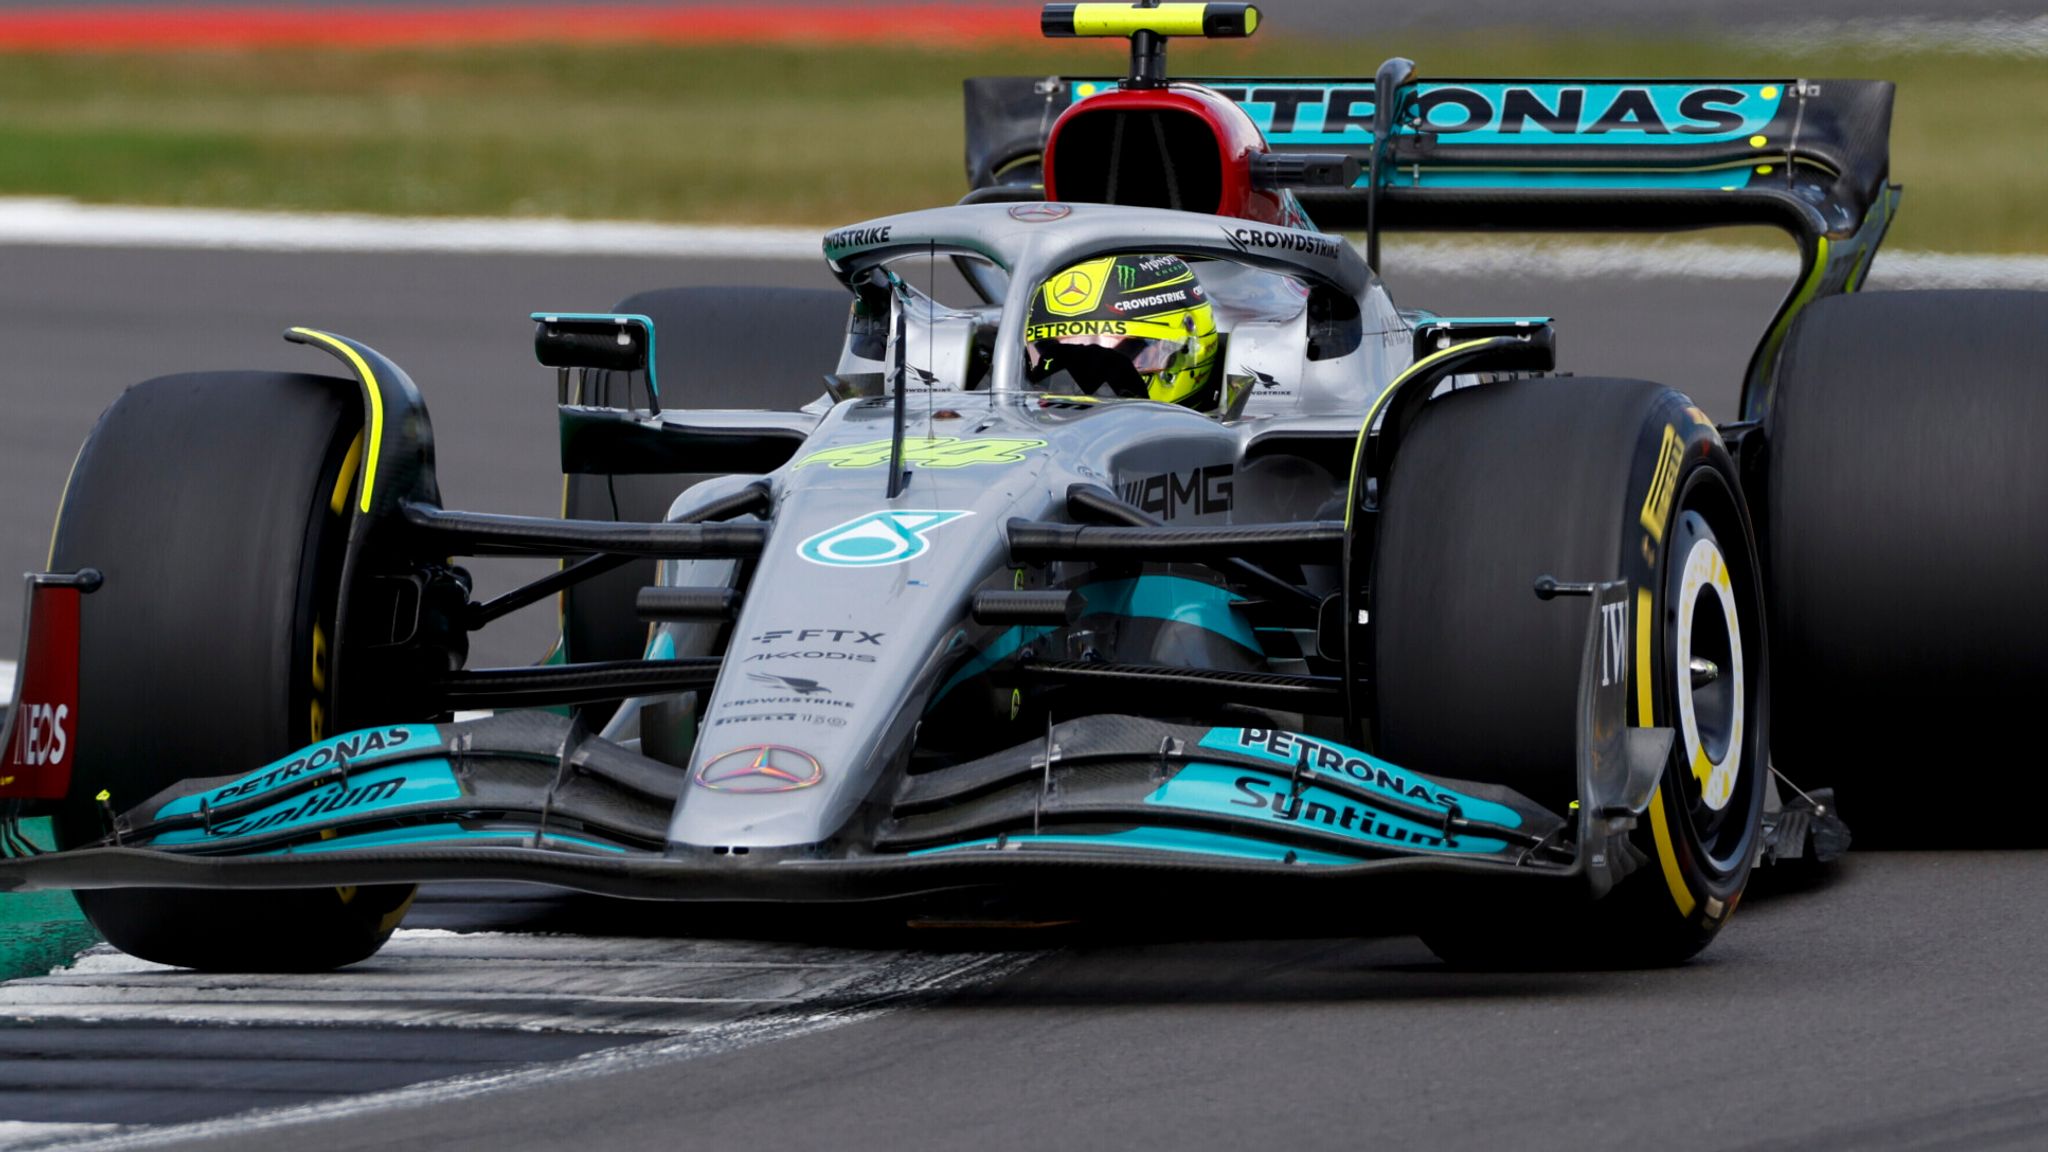 Mercedes at the Austrian GP Back in the game after competitive Silverstone, or trailing rivals again? F1 News